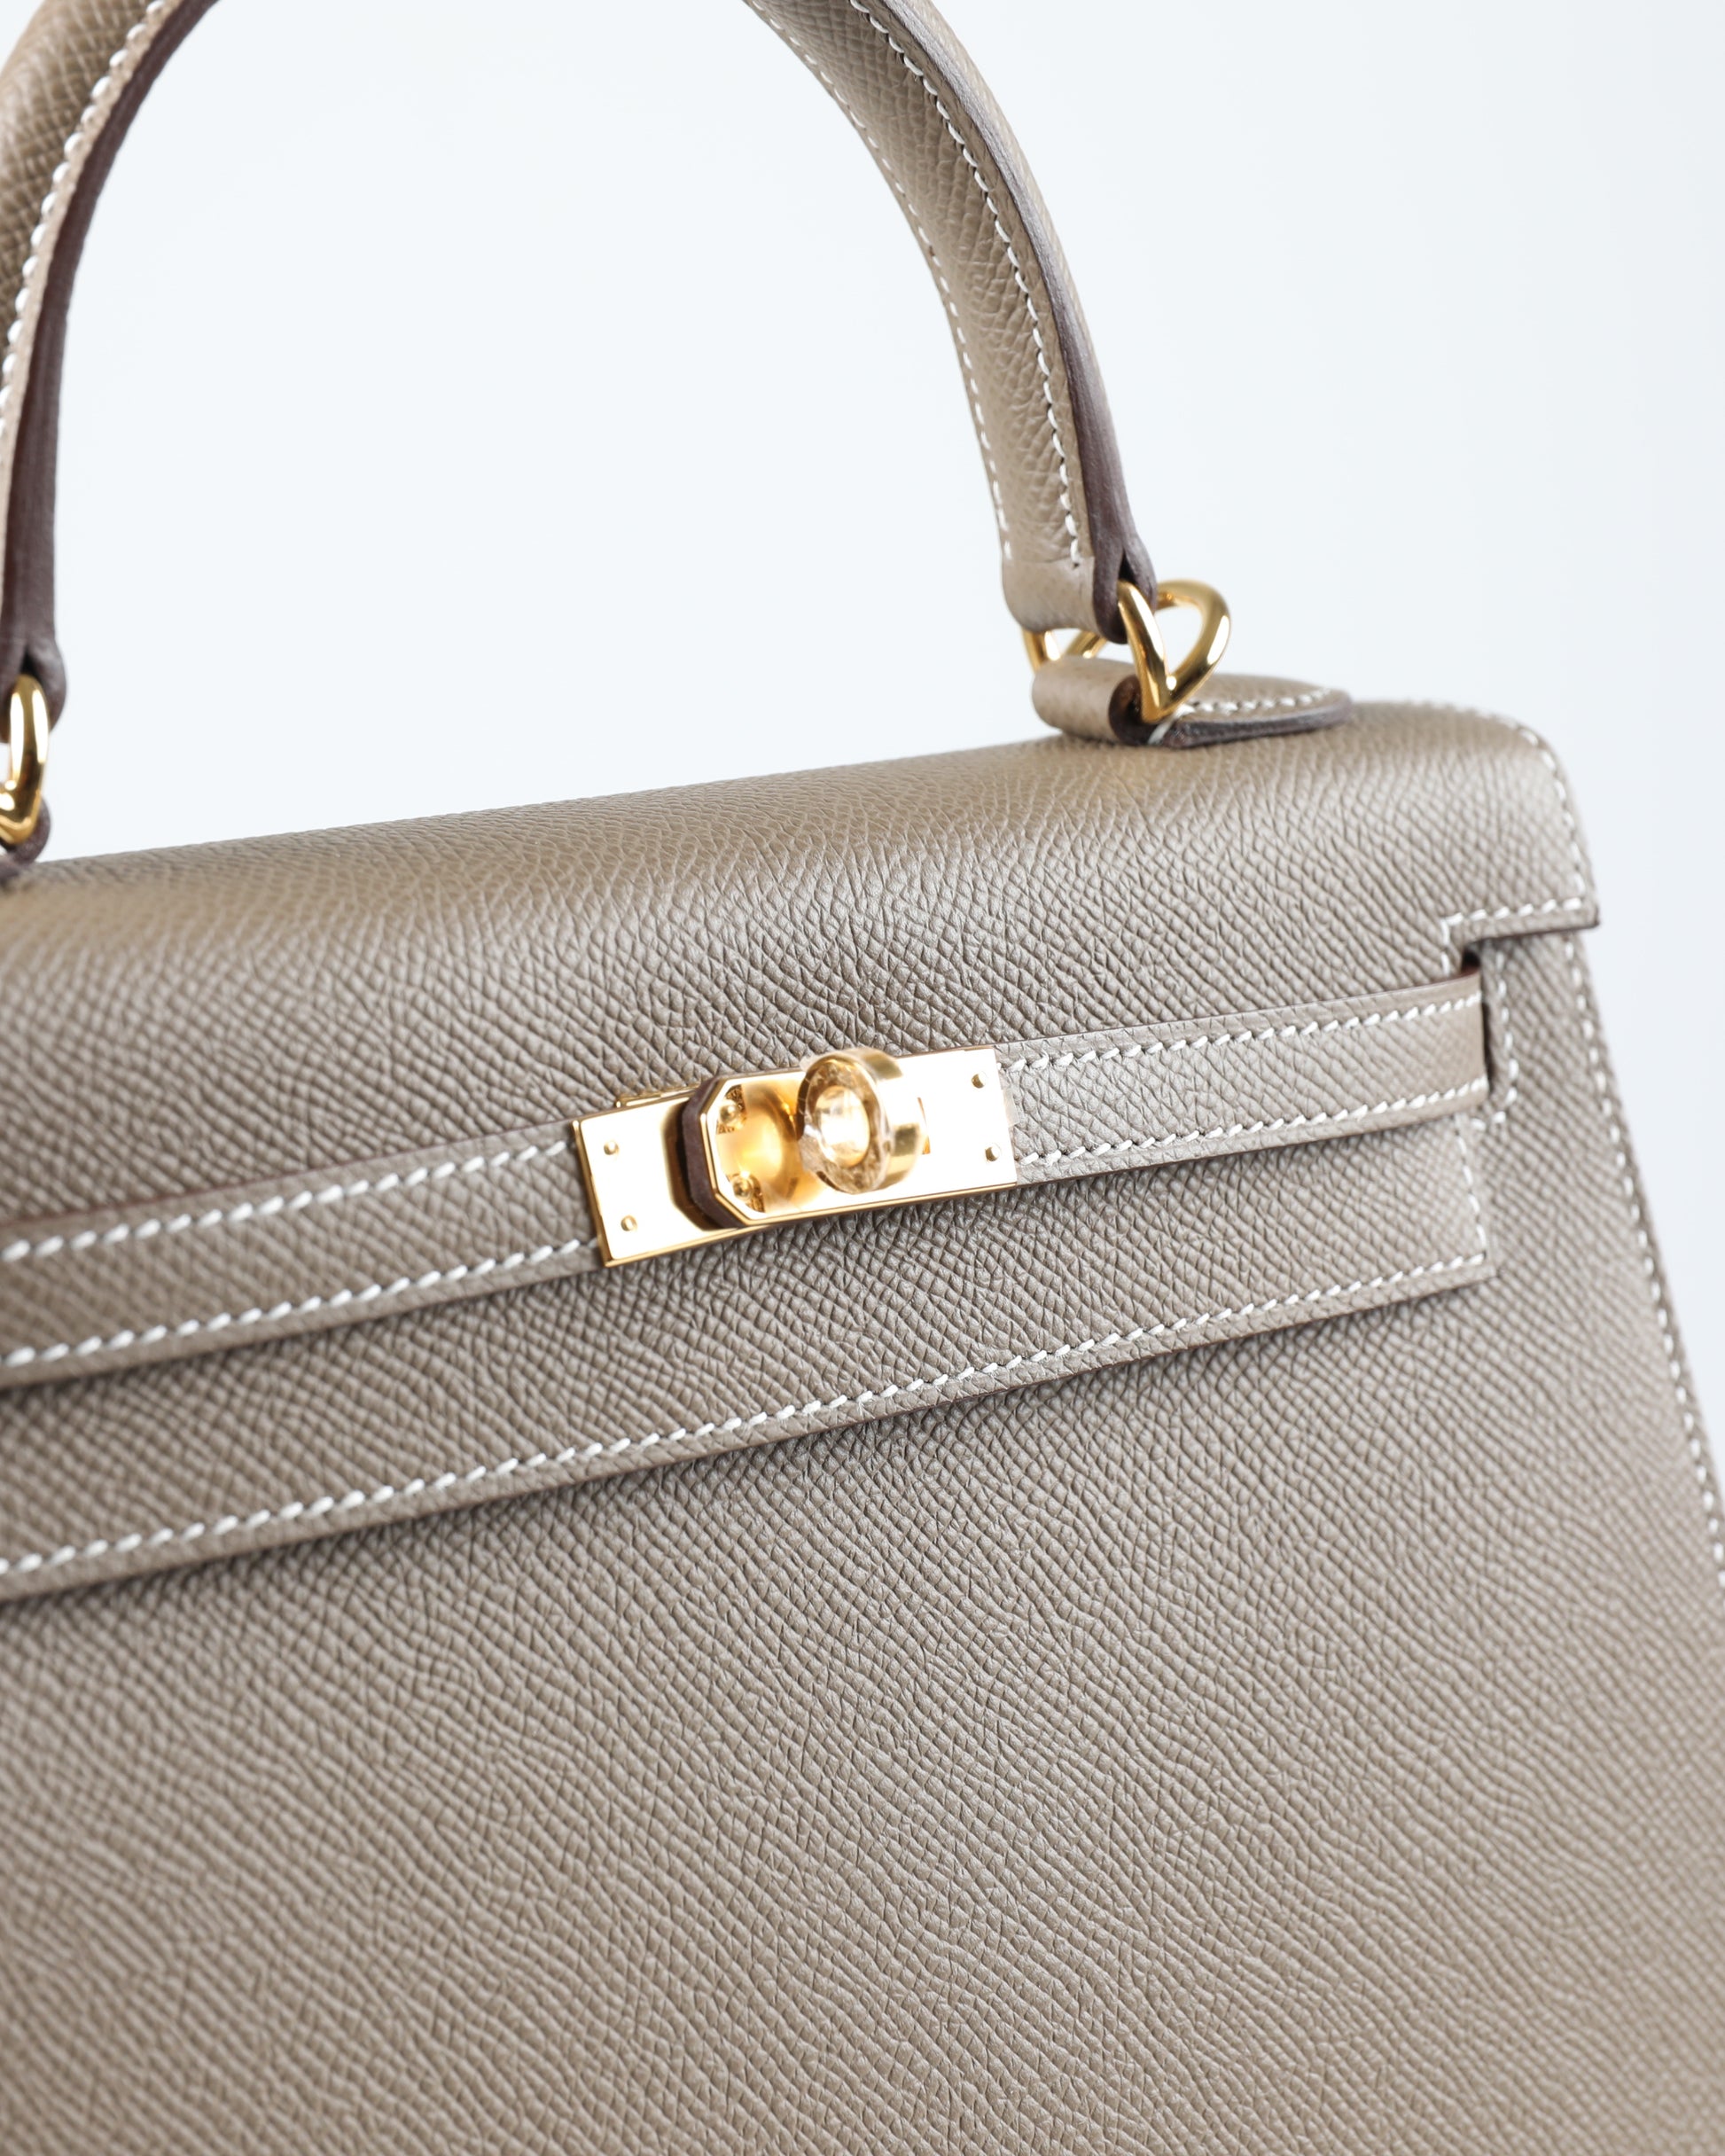 ✨Brand New✨ Kelly 25 in Etoupe Epsom leather with Silver hardware. This  color is the perfect alternative to Black as it carries the same elegance  in a, By Ginza Xiaoma